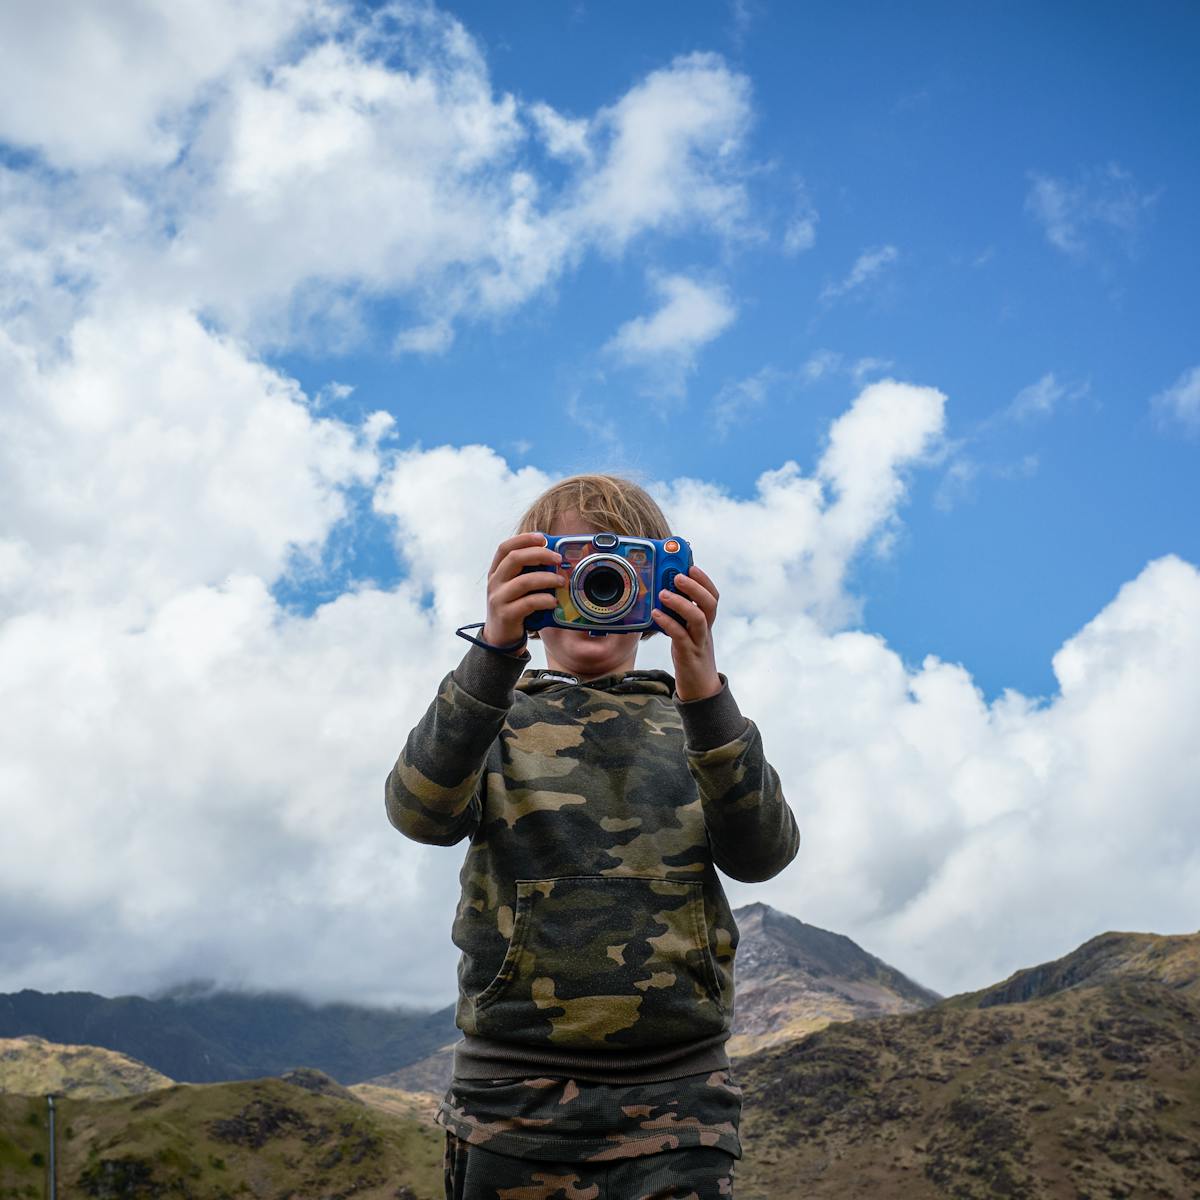 Photograph of a young child with blonde hair holding up a colourful camera. The camera obscures their face and they are wearing a camouflage jumper and tracksuit bottoms. There are some mountains behind them and the sky is blue and cloudy. 